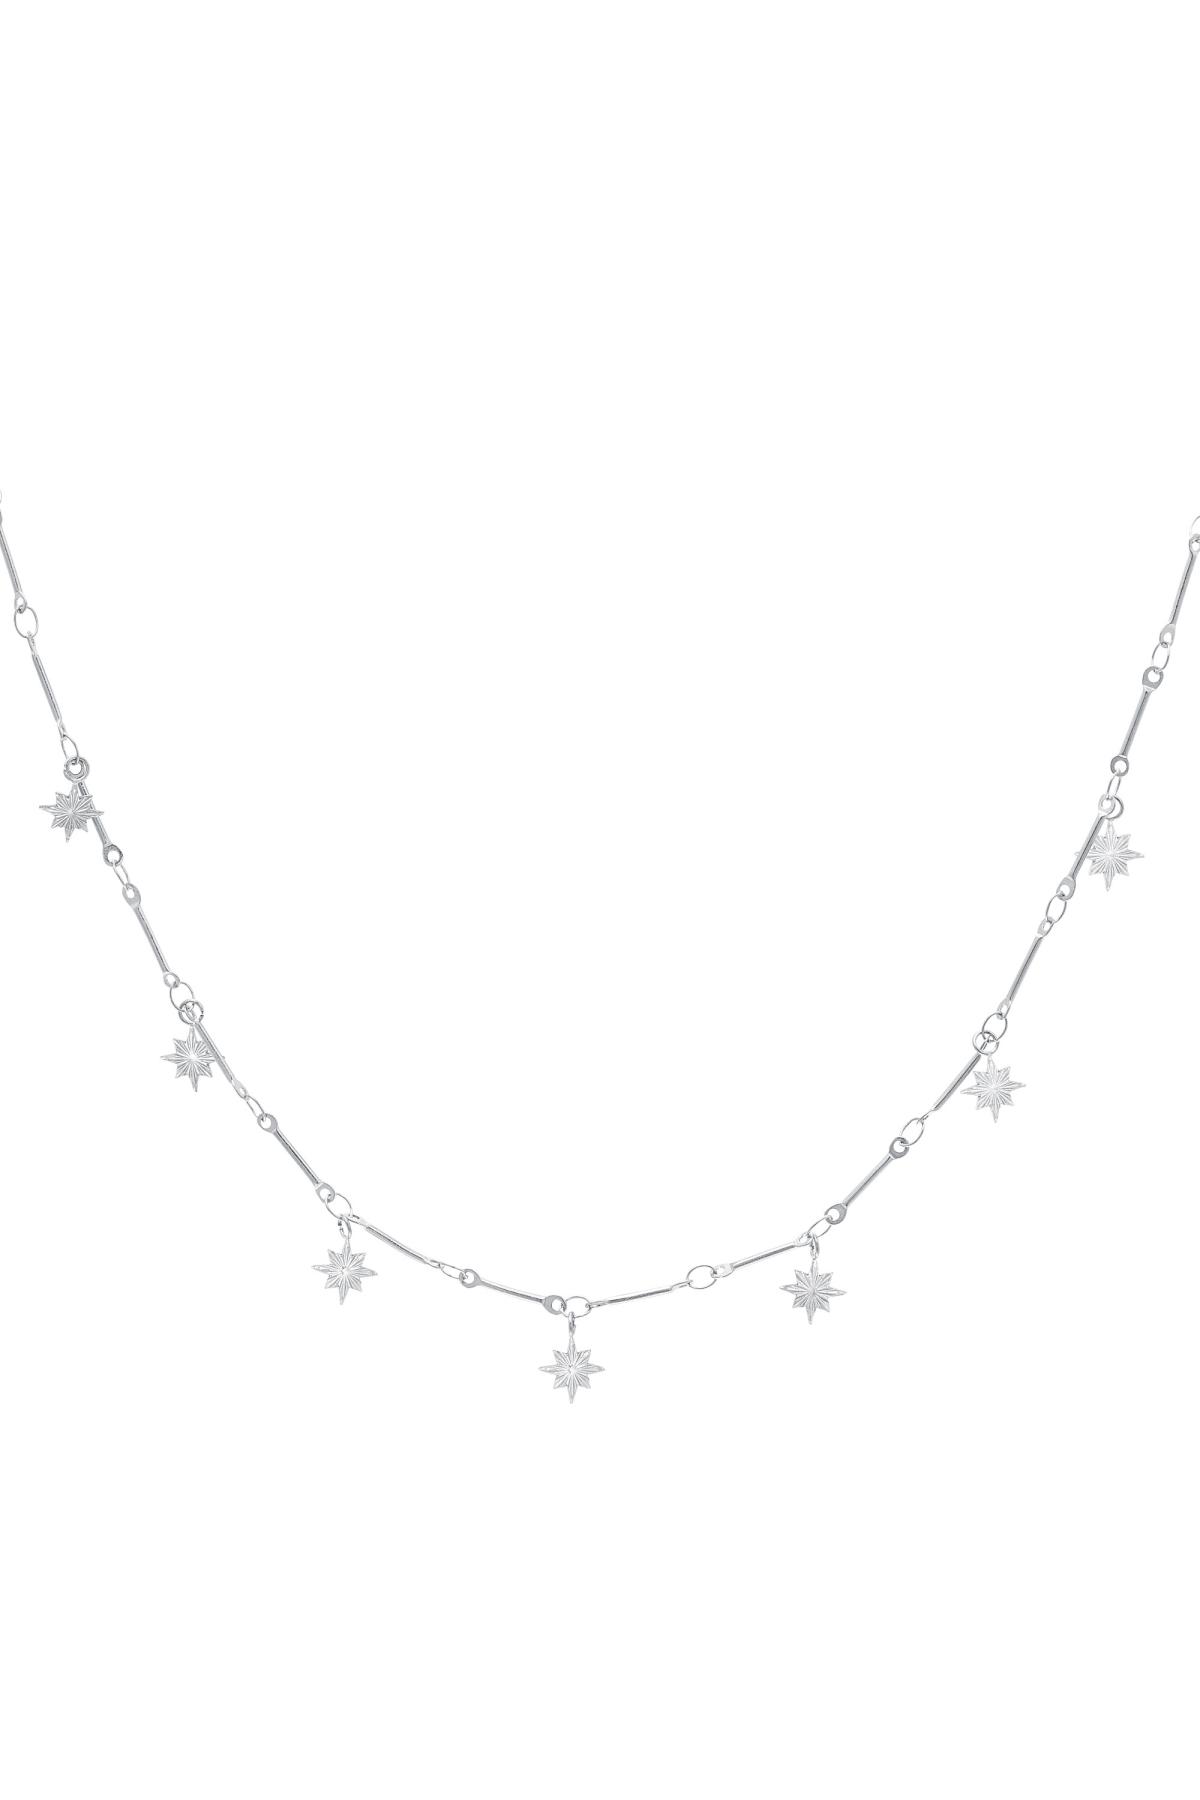 Necklace North Star Silver Stainless Steel